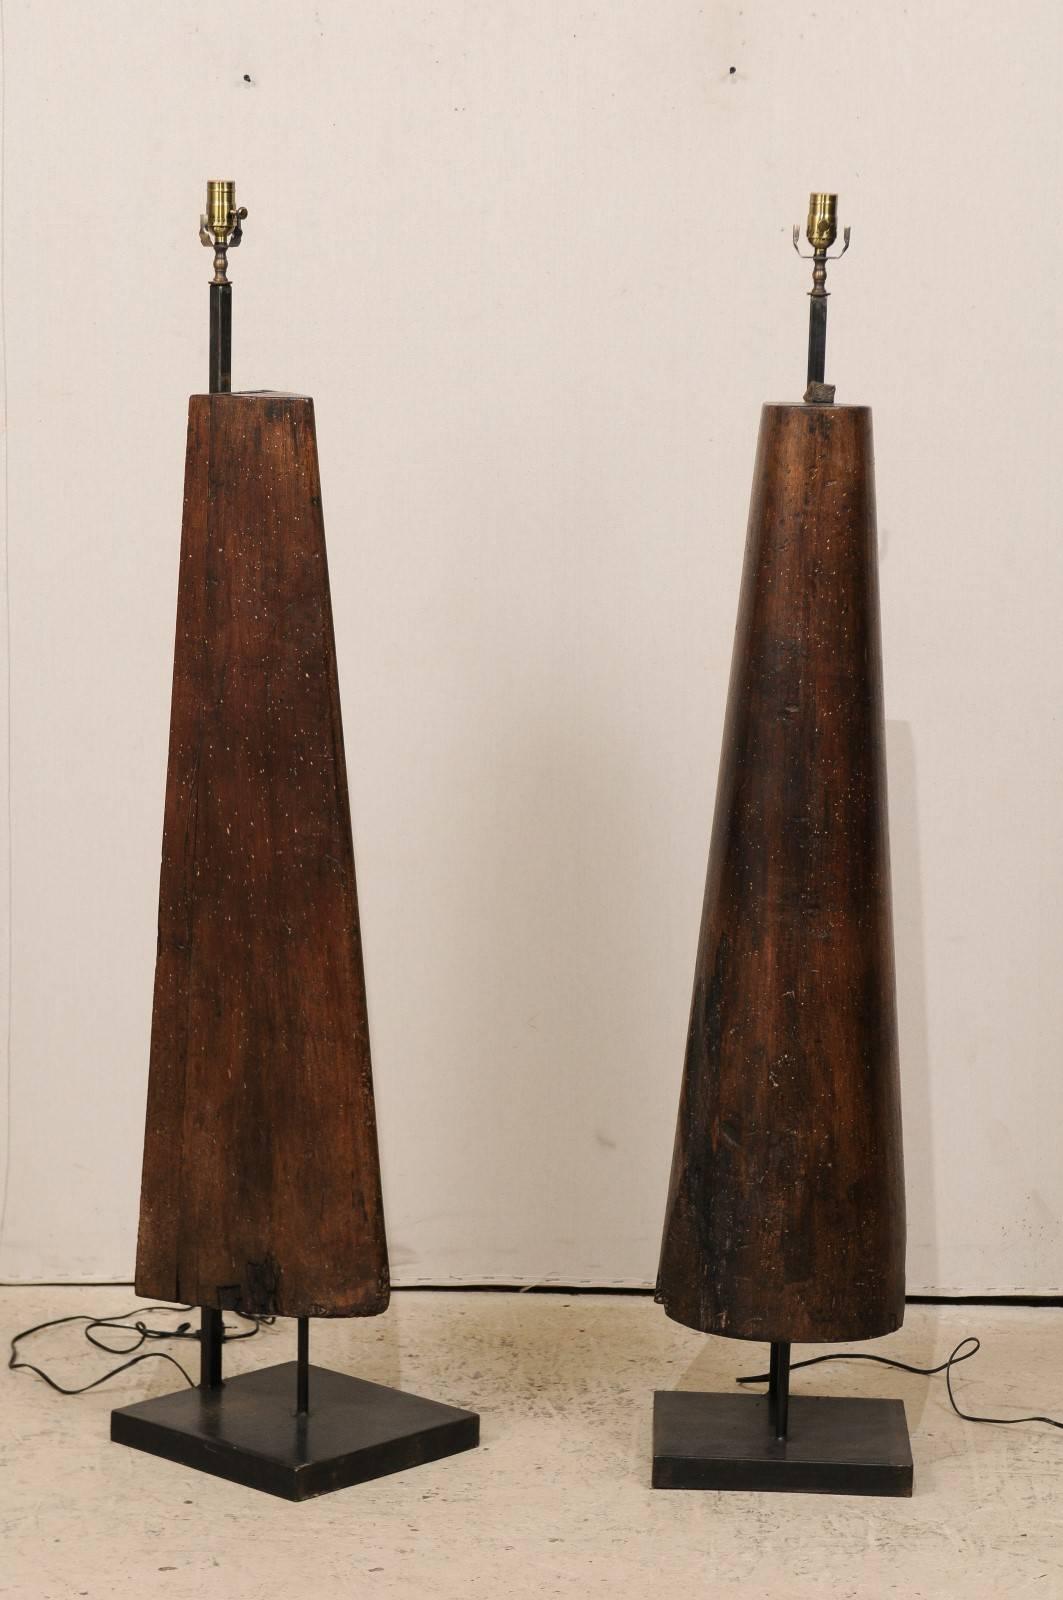 A pair of modern style French floor lamps from the mid-20th century. This pair of French mid-century floor lamps have been fashioned out of old industrial forms and set onto newer, custom metal bases. These floor lamps have a rich brown color with